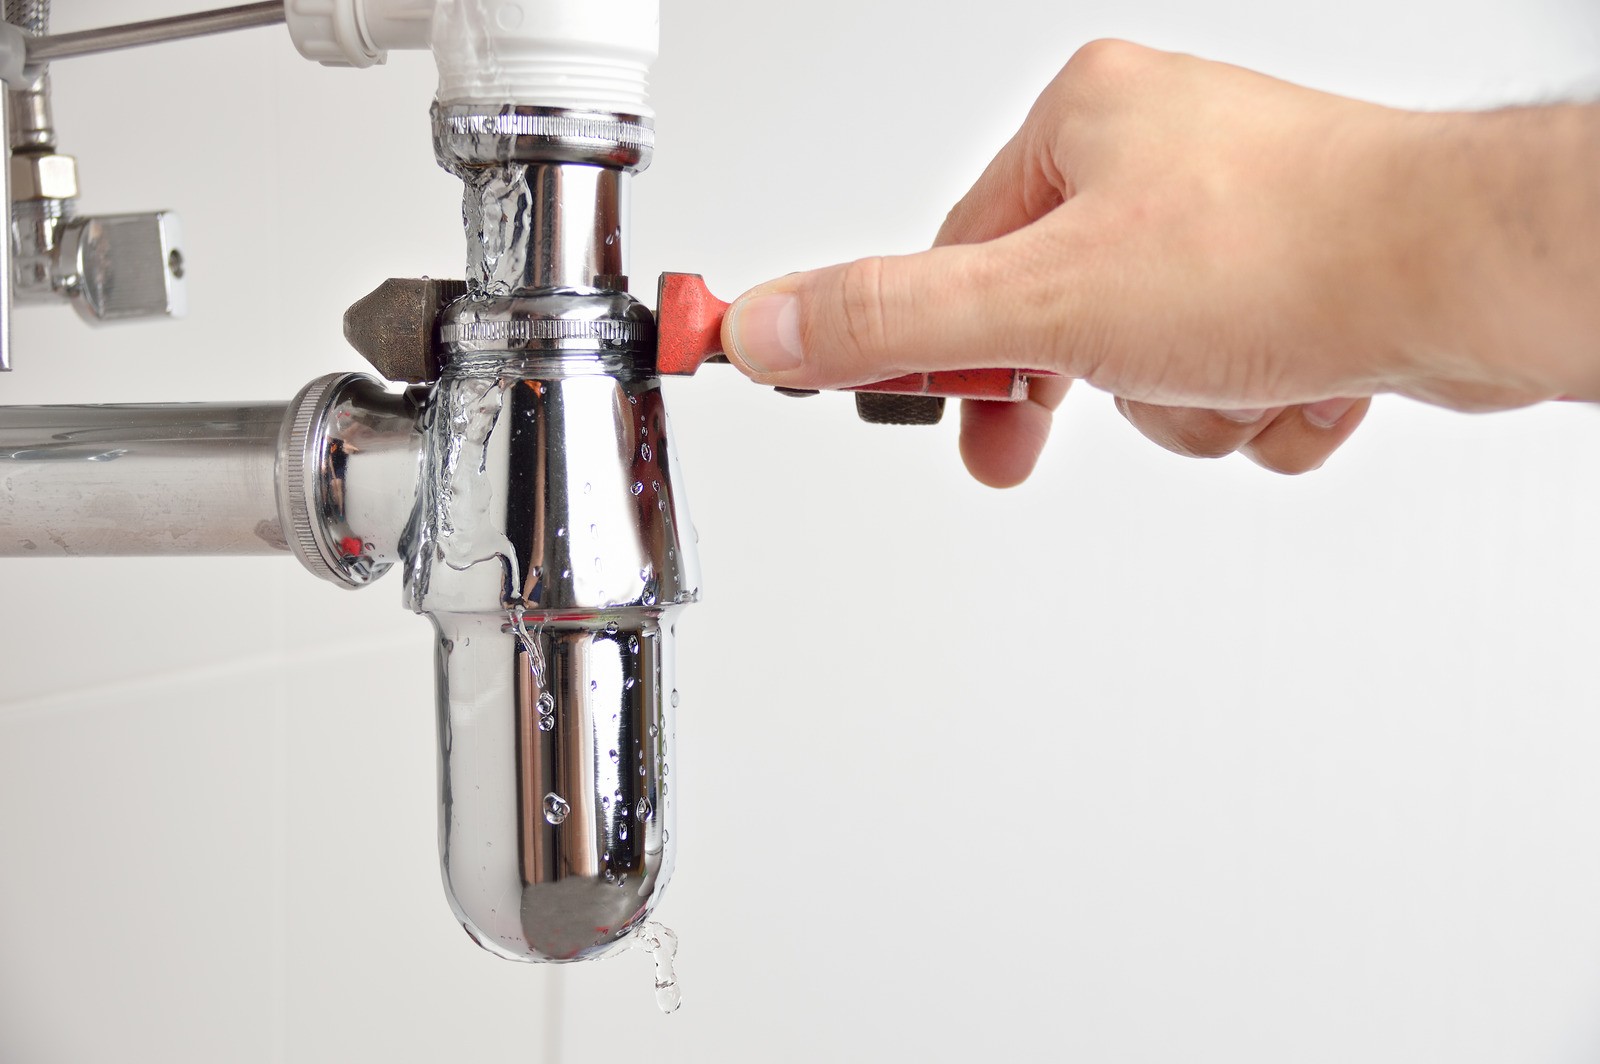 Plumbing Service in Peachtree, GA. Reliable & Fast. Available Now. 